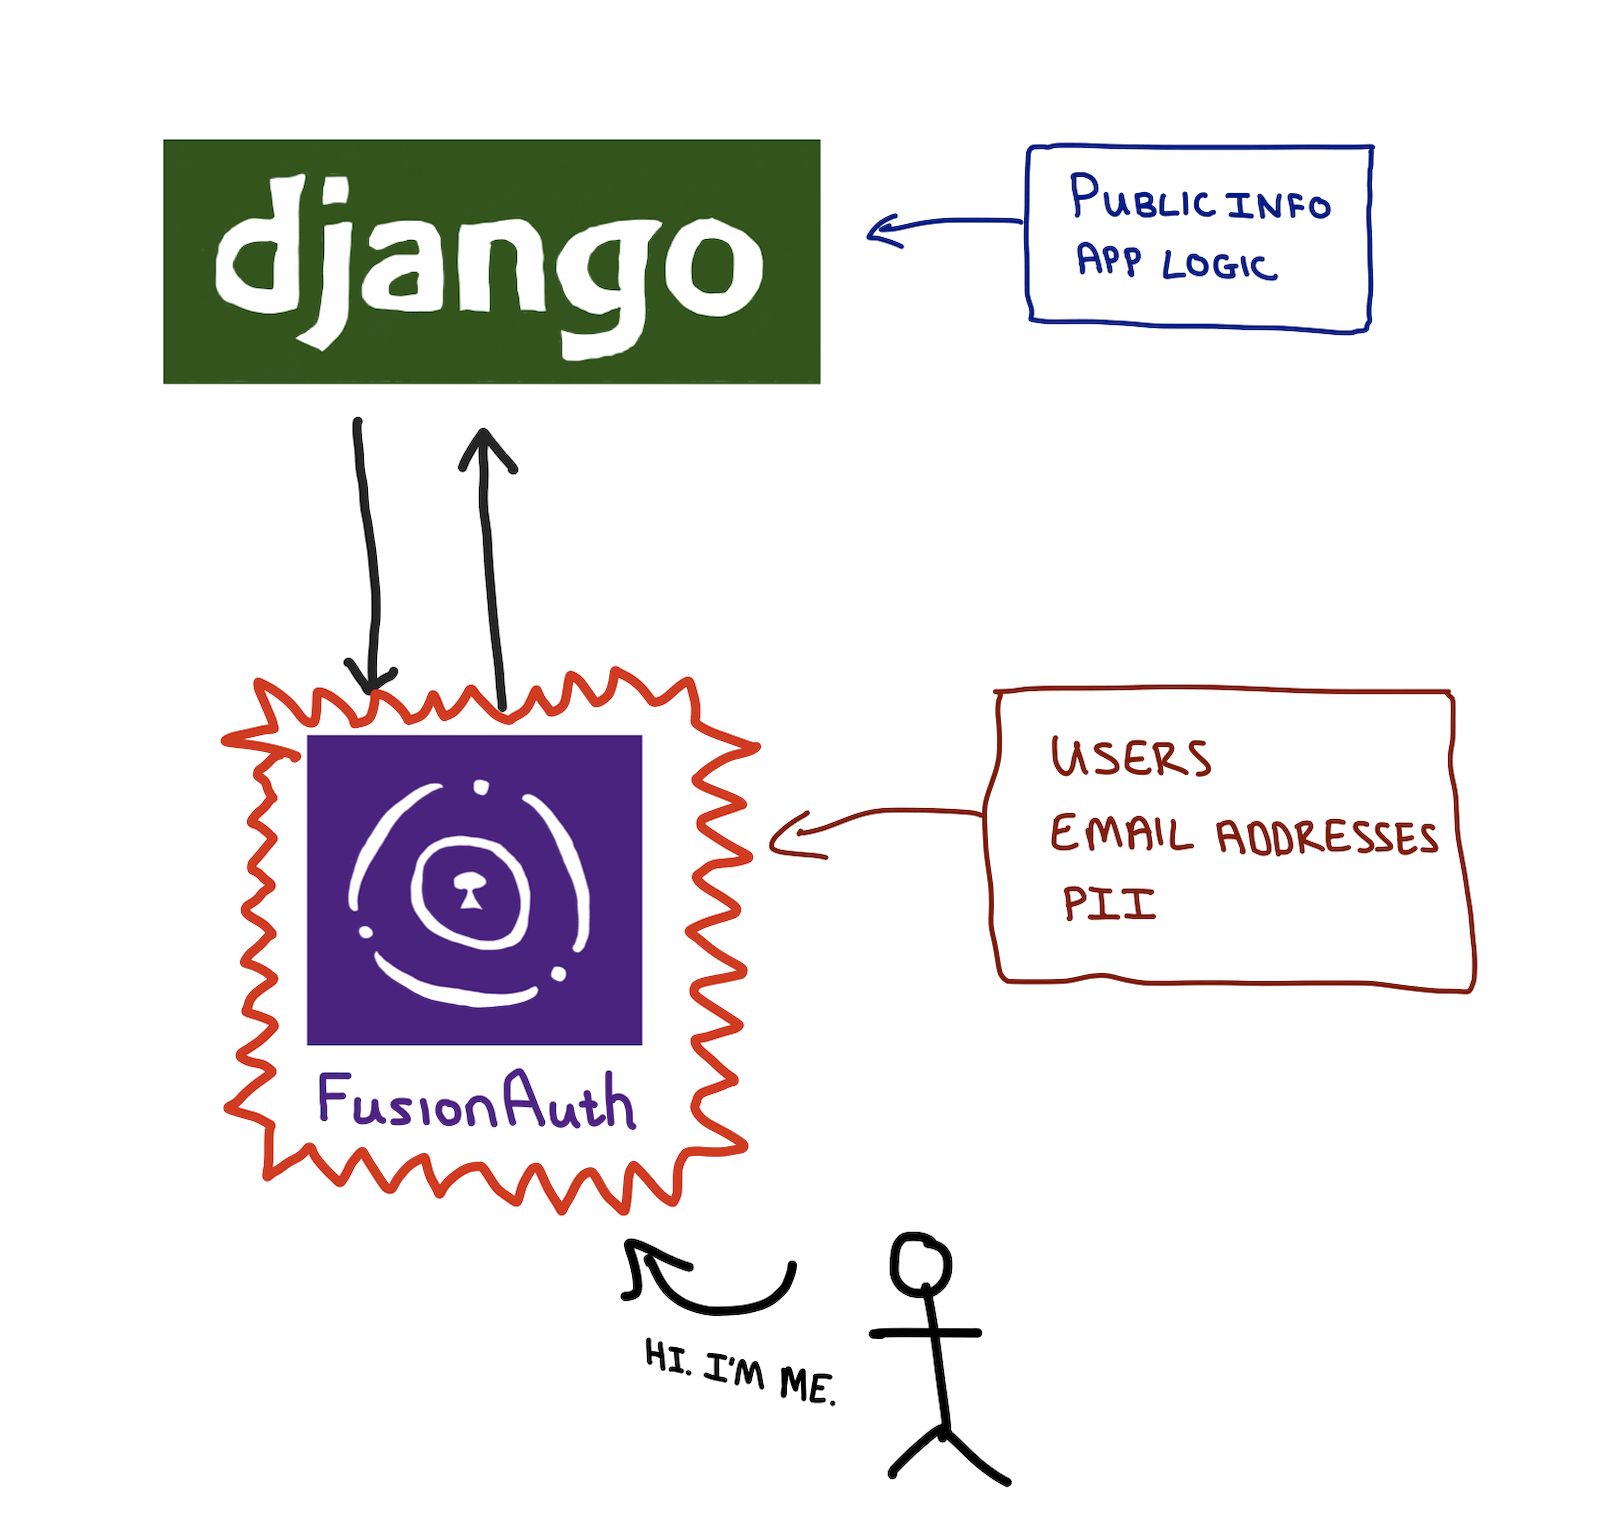 Important private data goes in FusionAuth. Everything else in Django.